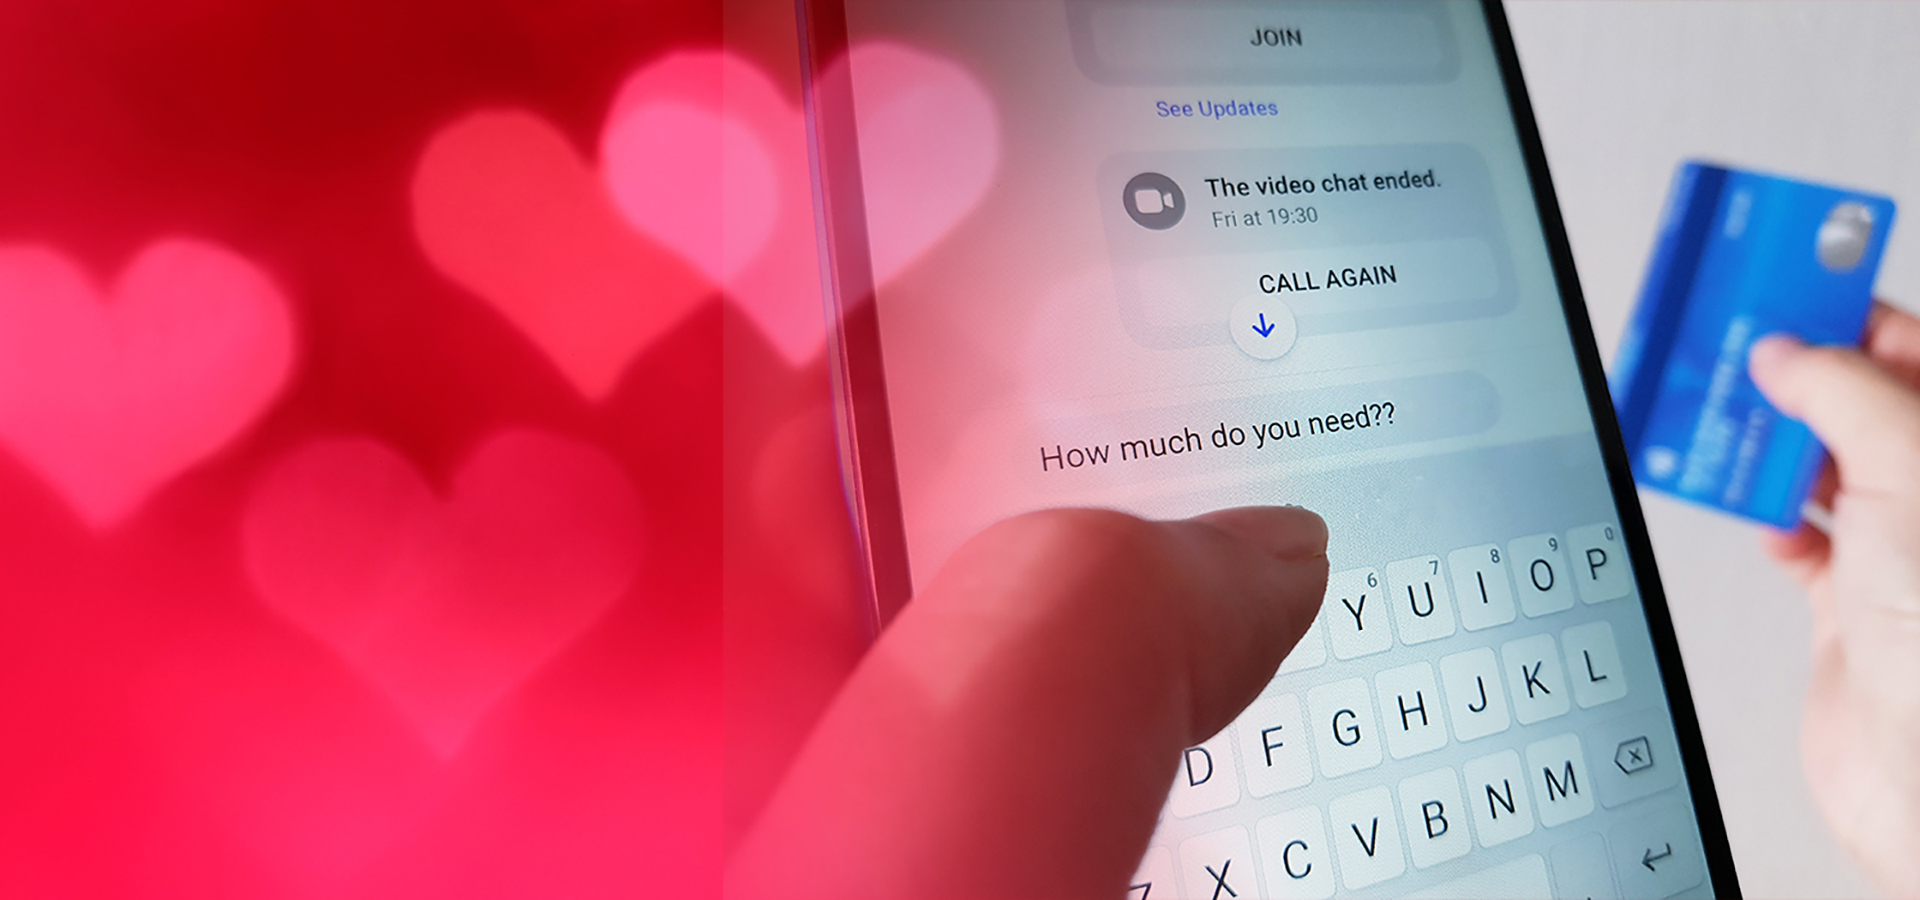 Looking for love online? Protect yourself against romance scams